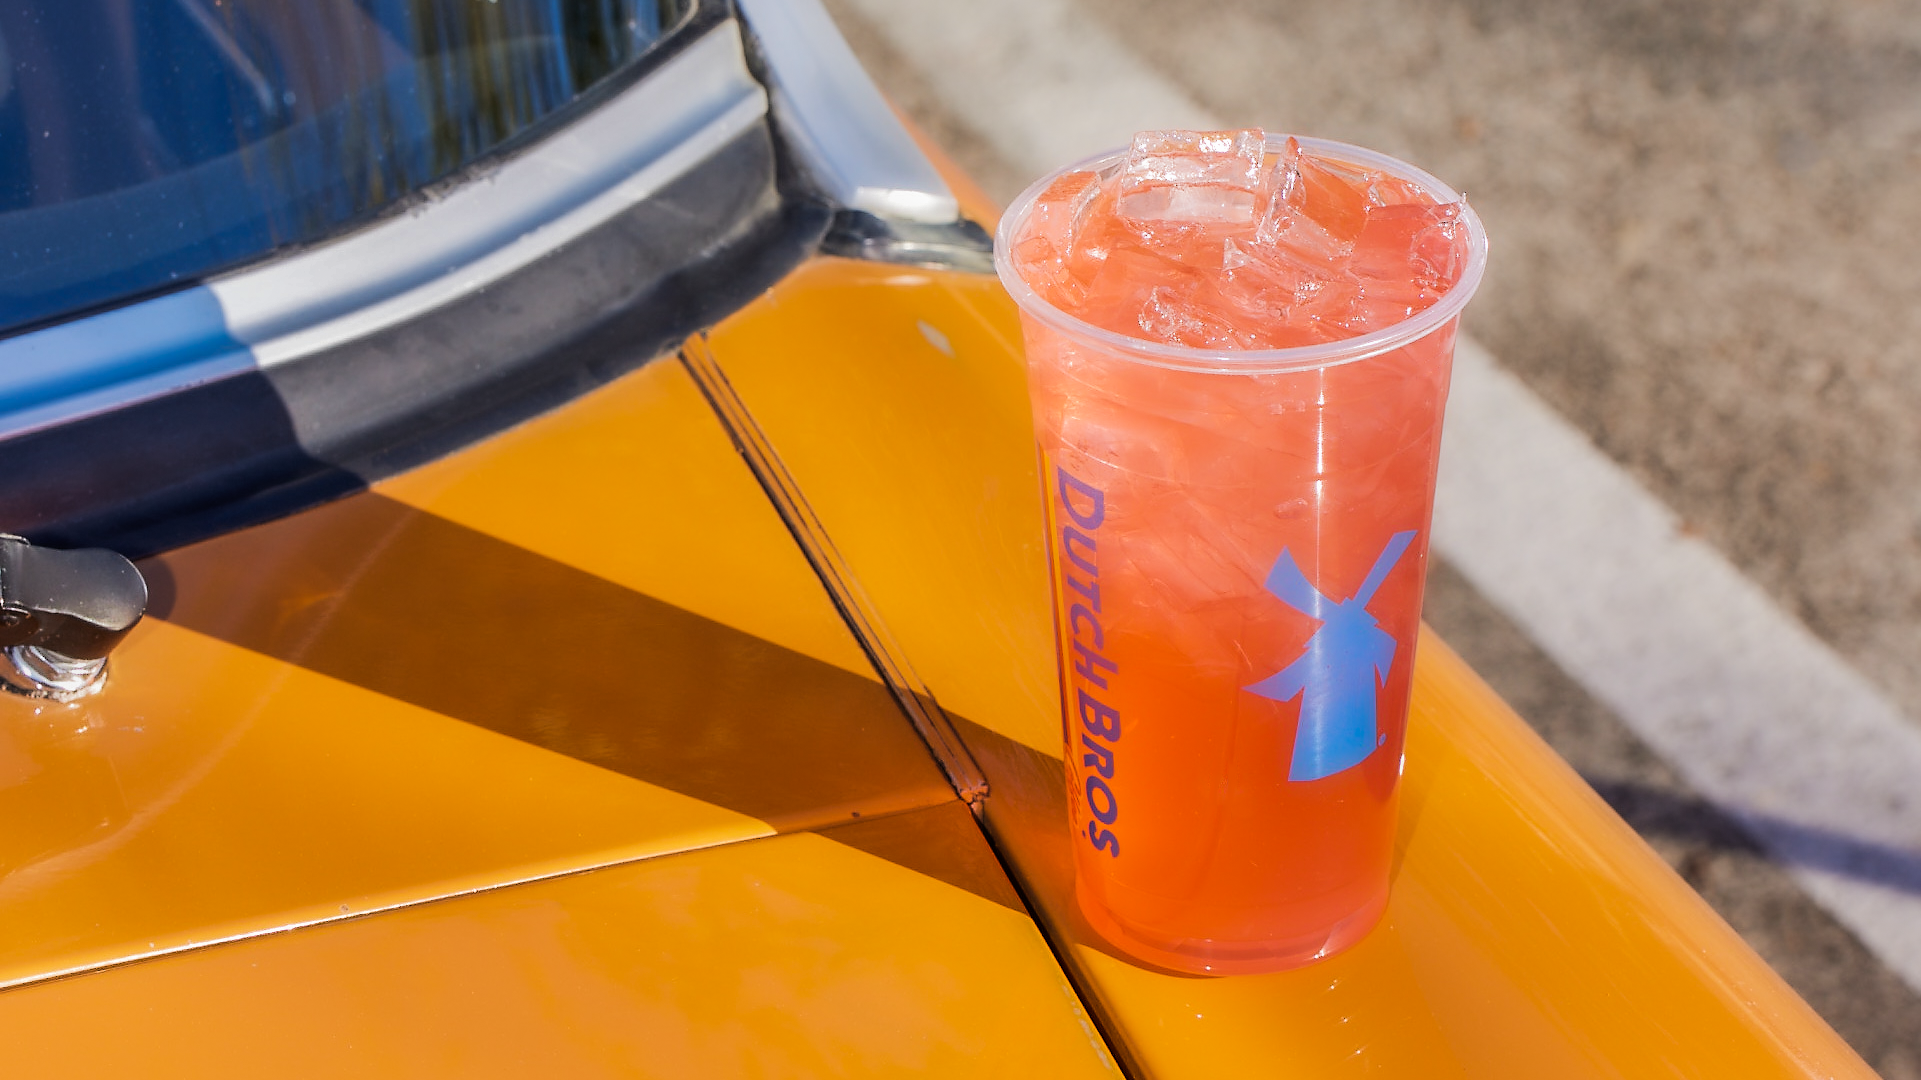 Energize the day at Dutch Bros! Grab an epic coffee or Rebel energy drink.